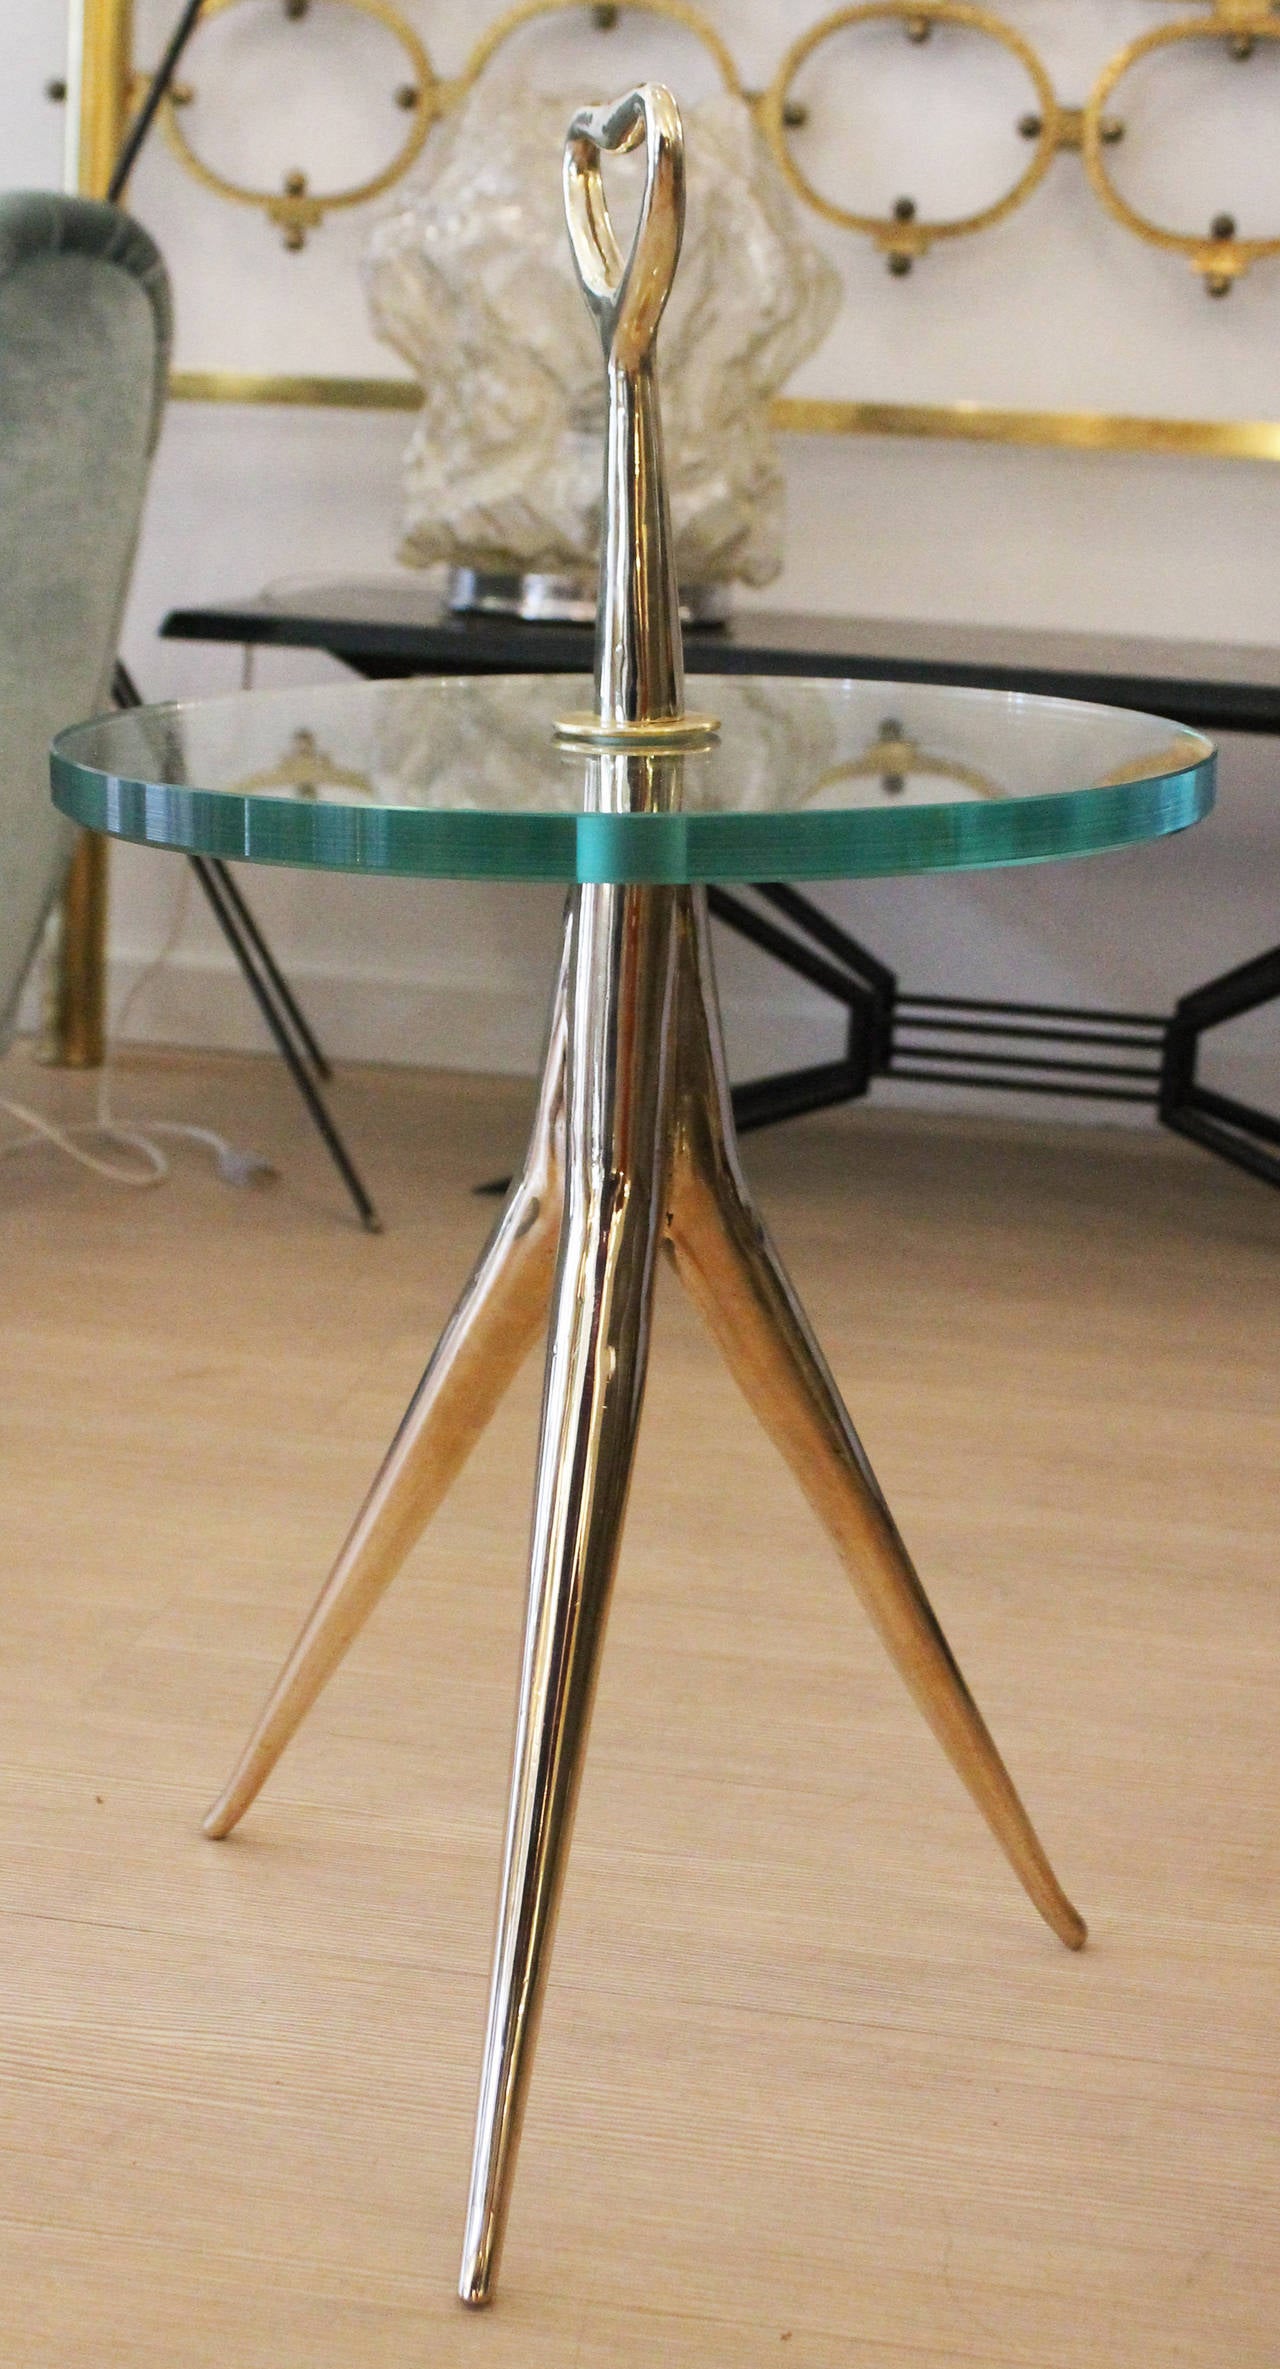 Elegant and sleek Italian bronze side table with three thin legs ending in a central body with handle. Thick circular clear glass at the center.